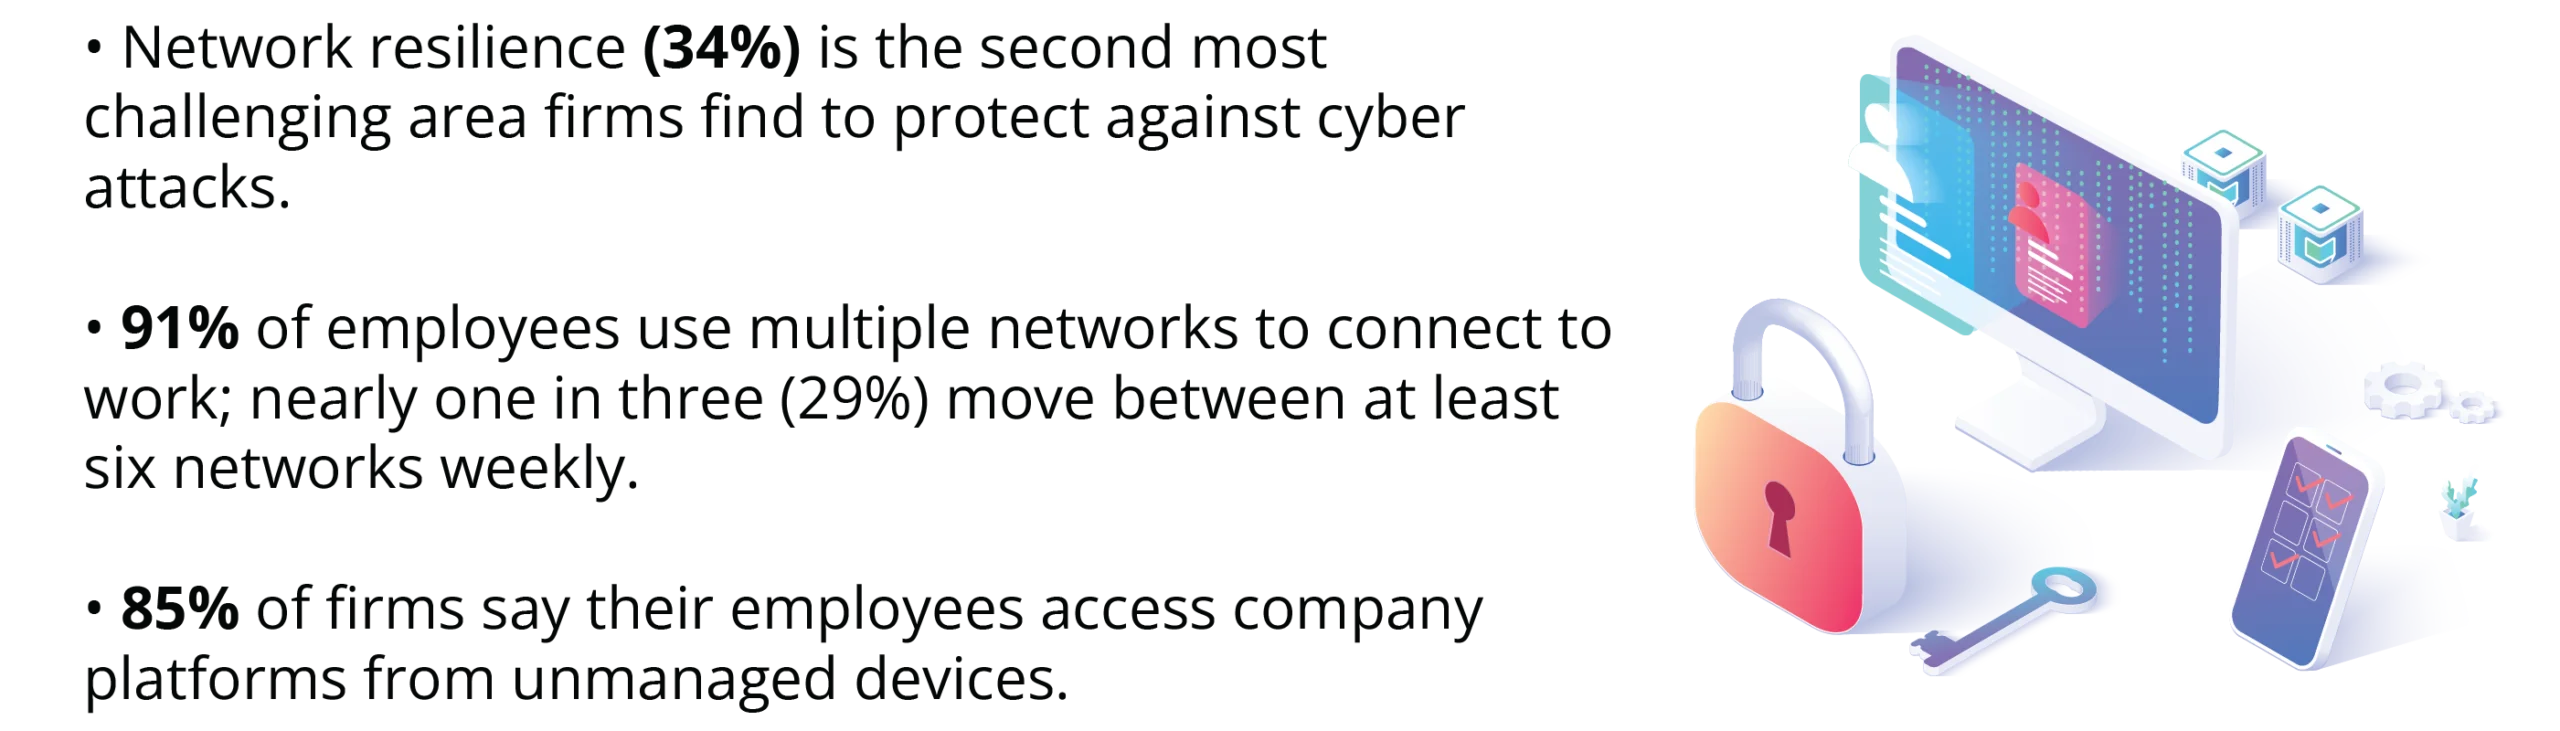 Network resilience (34%) is the second most challenging area firms find to protect against cyber attacks.